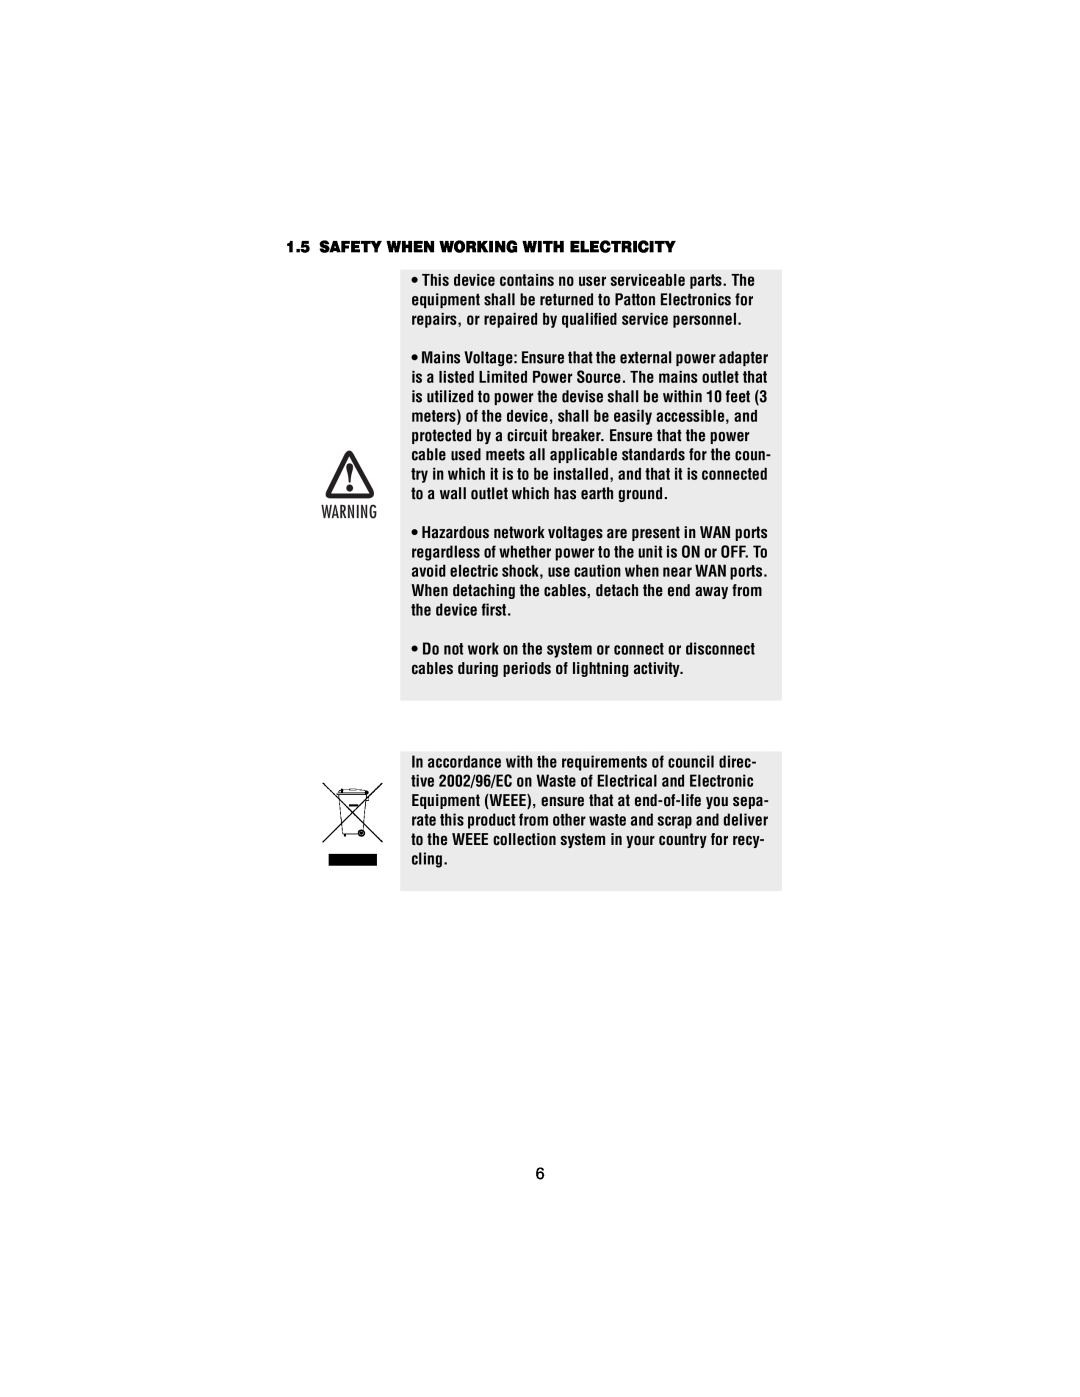 Patton electronic 2172 user manual Safety When Working With Electricity 